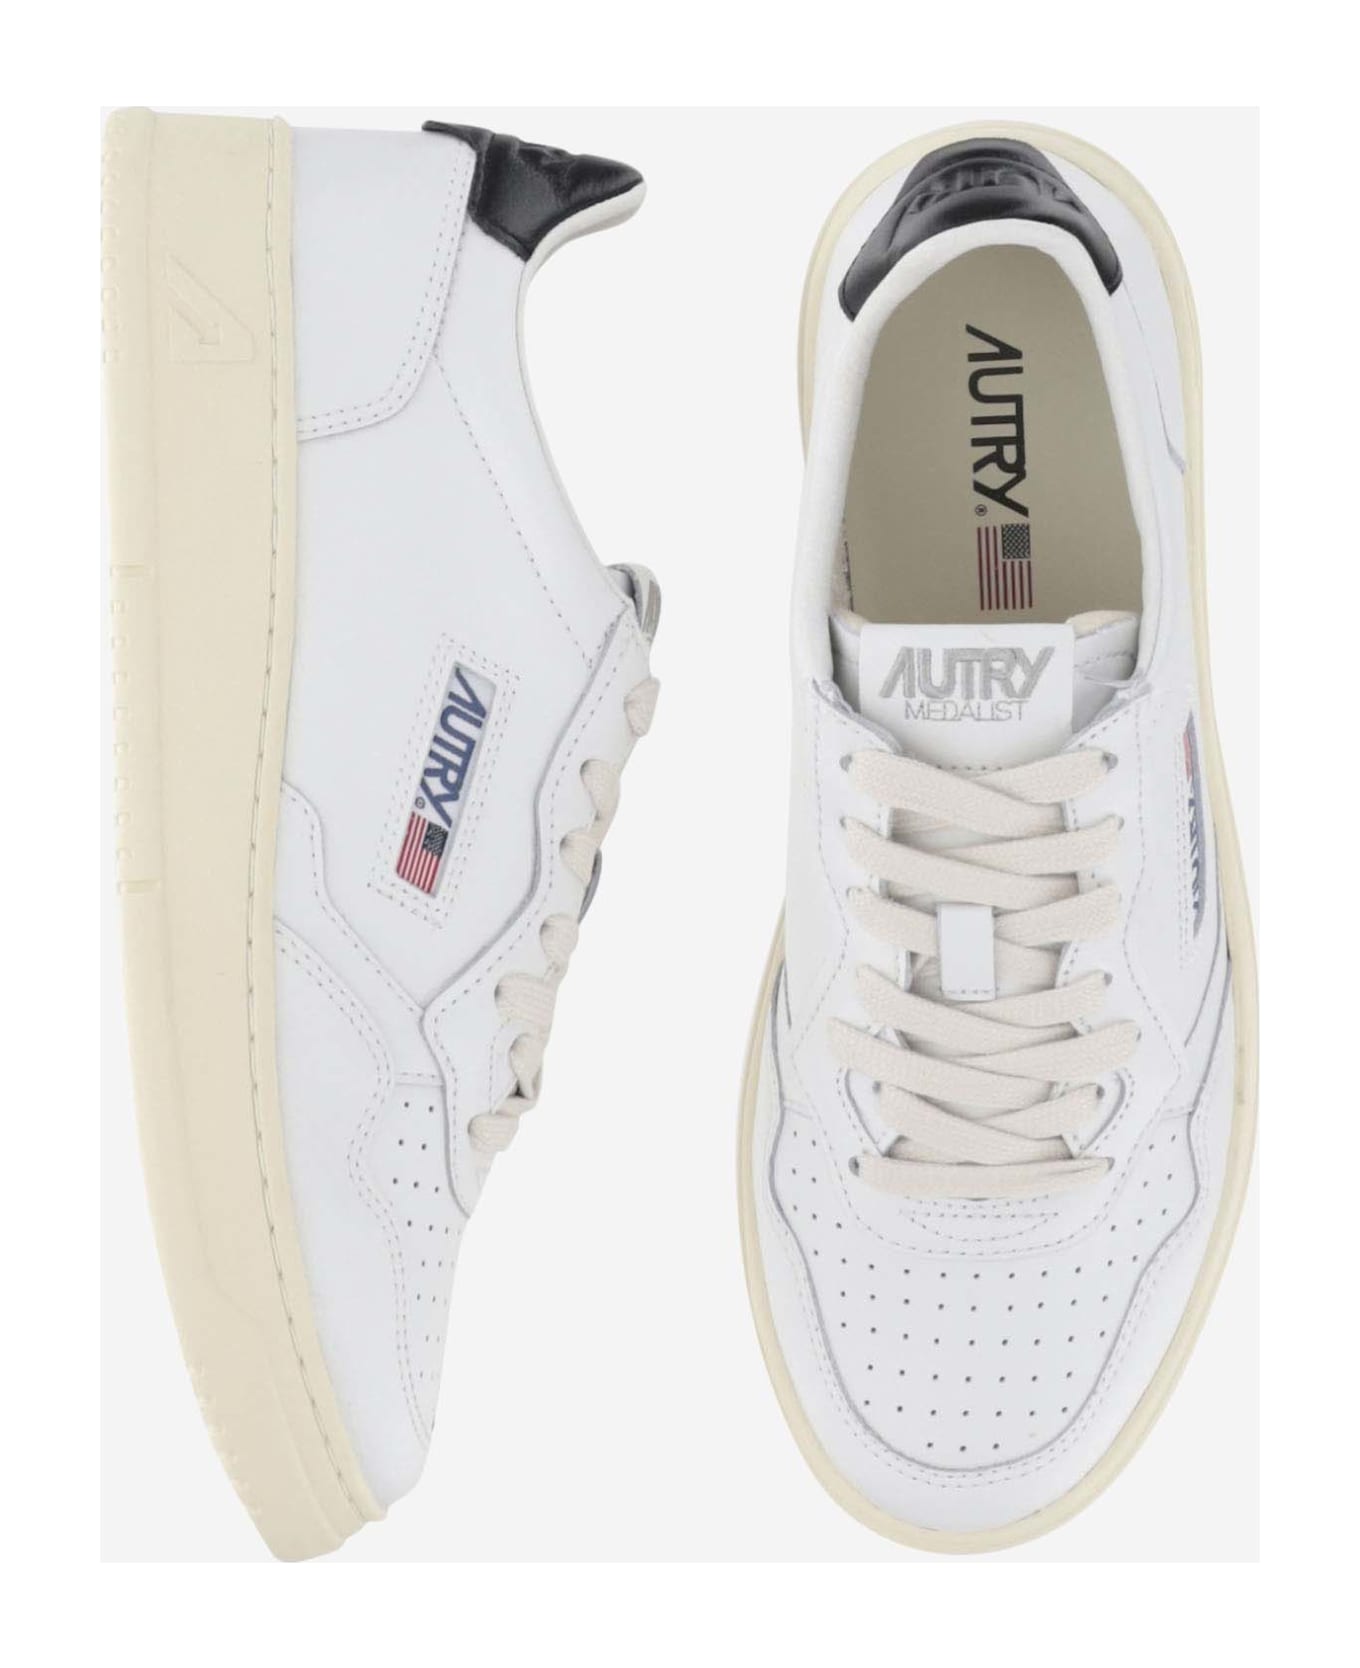 Autry Low Medalist Sneakers - WHT/BLACK スニーカー